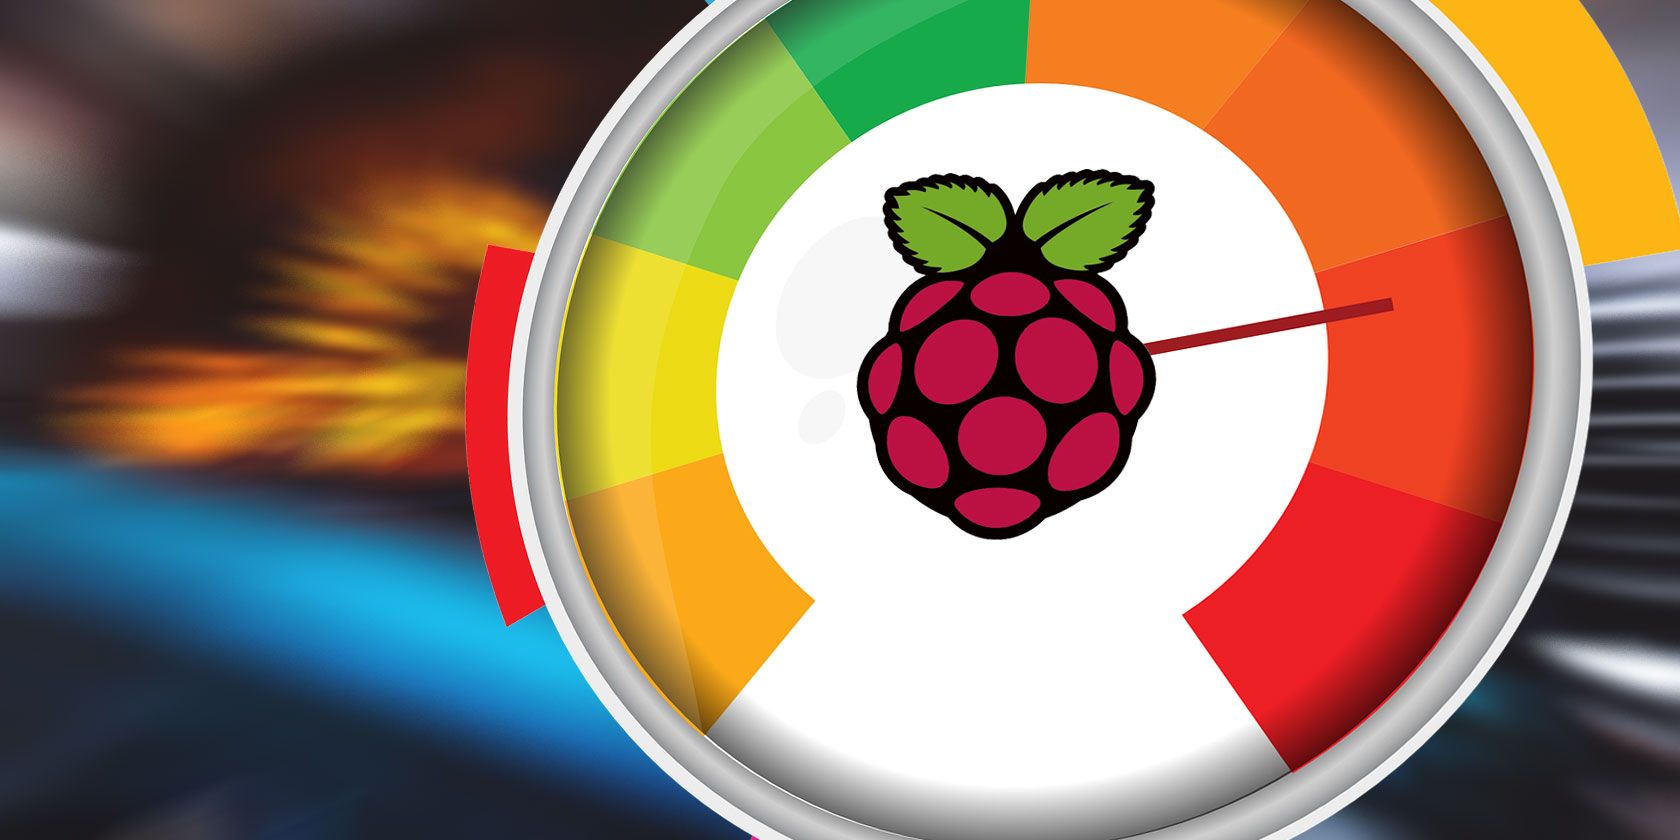 Overclocking Raspberry Pi: How to Do It and What You Need to Know